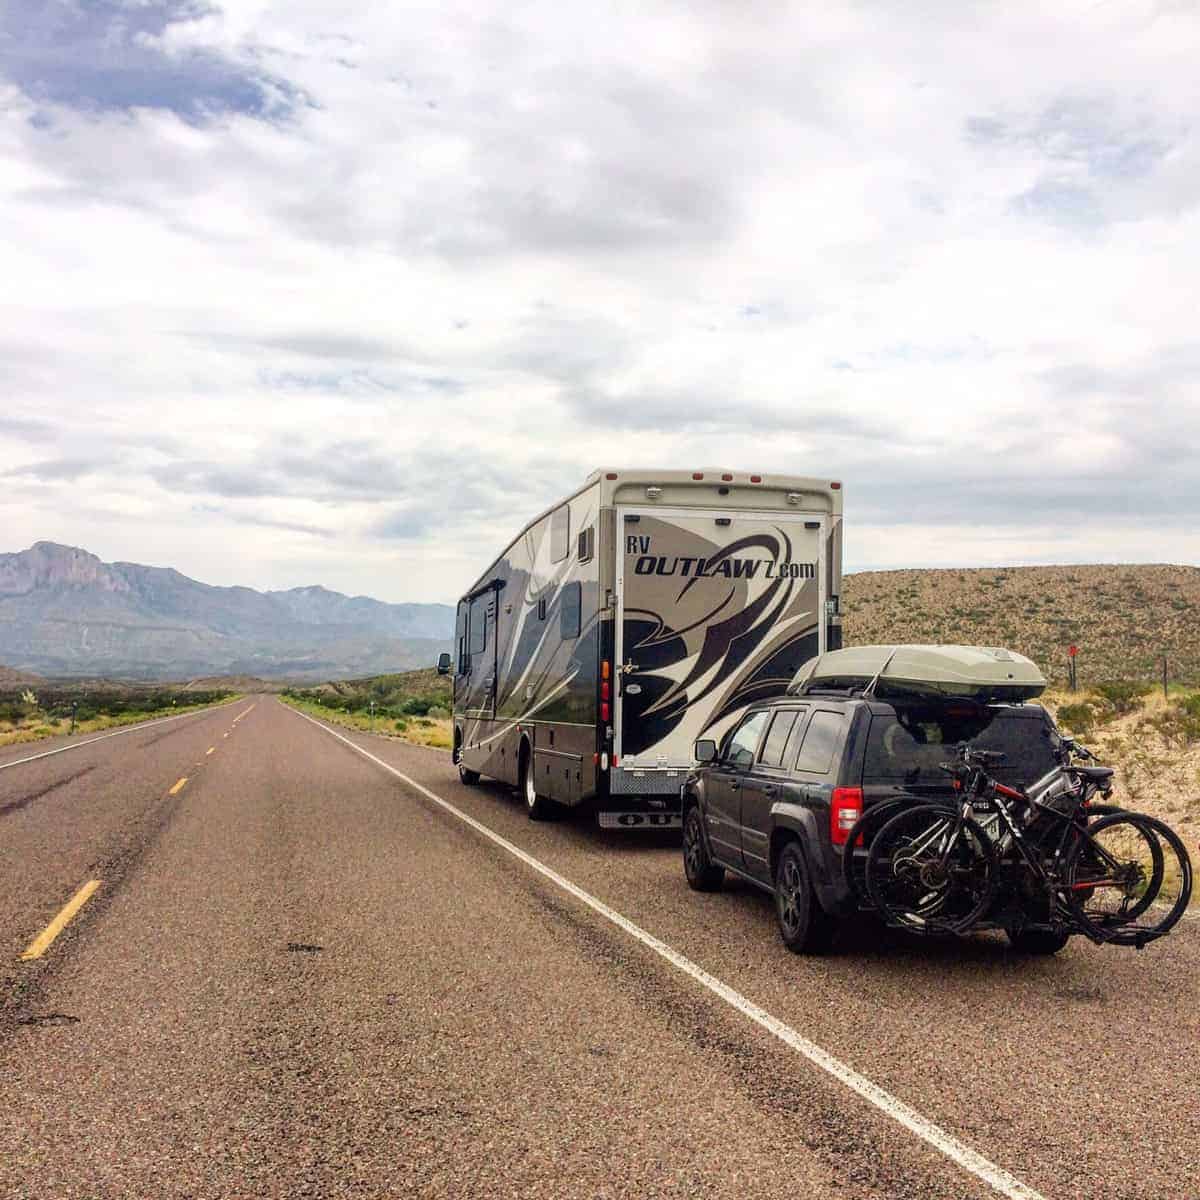 What Jeep Can Be Flat Towed Behind an RV? - Four Wheel Trends